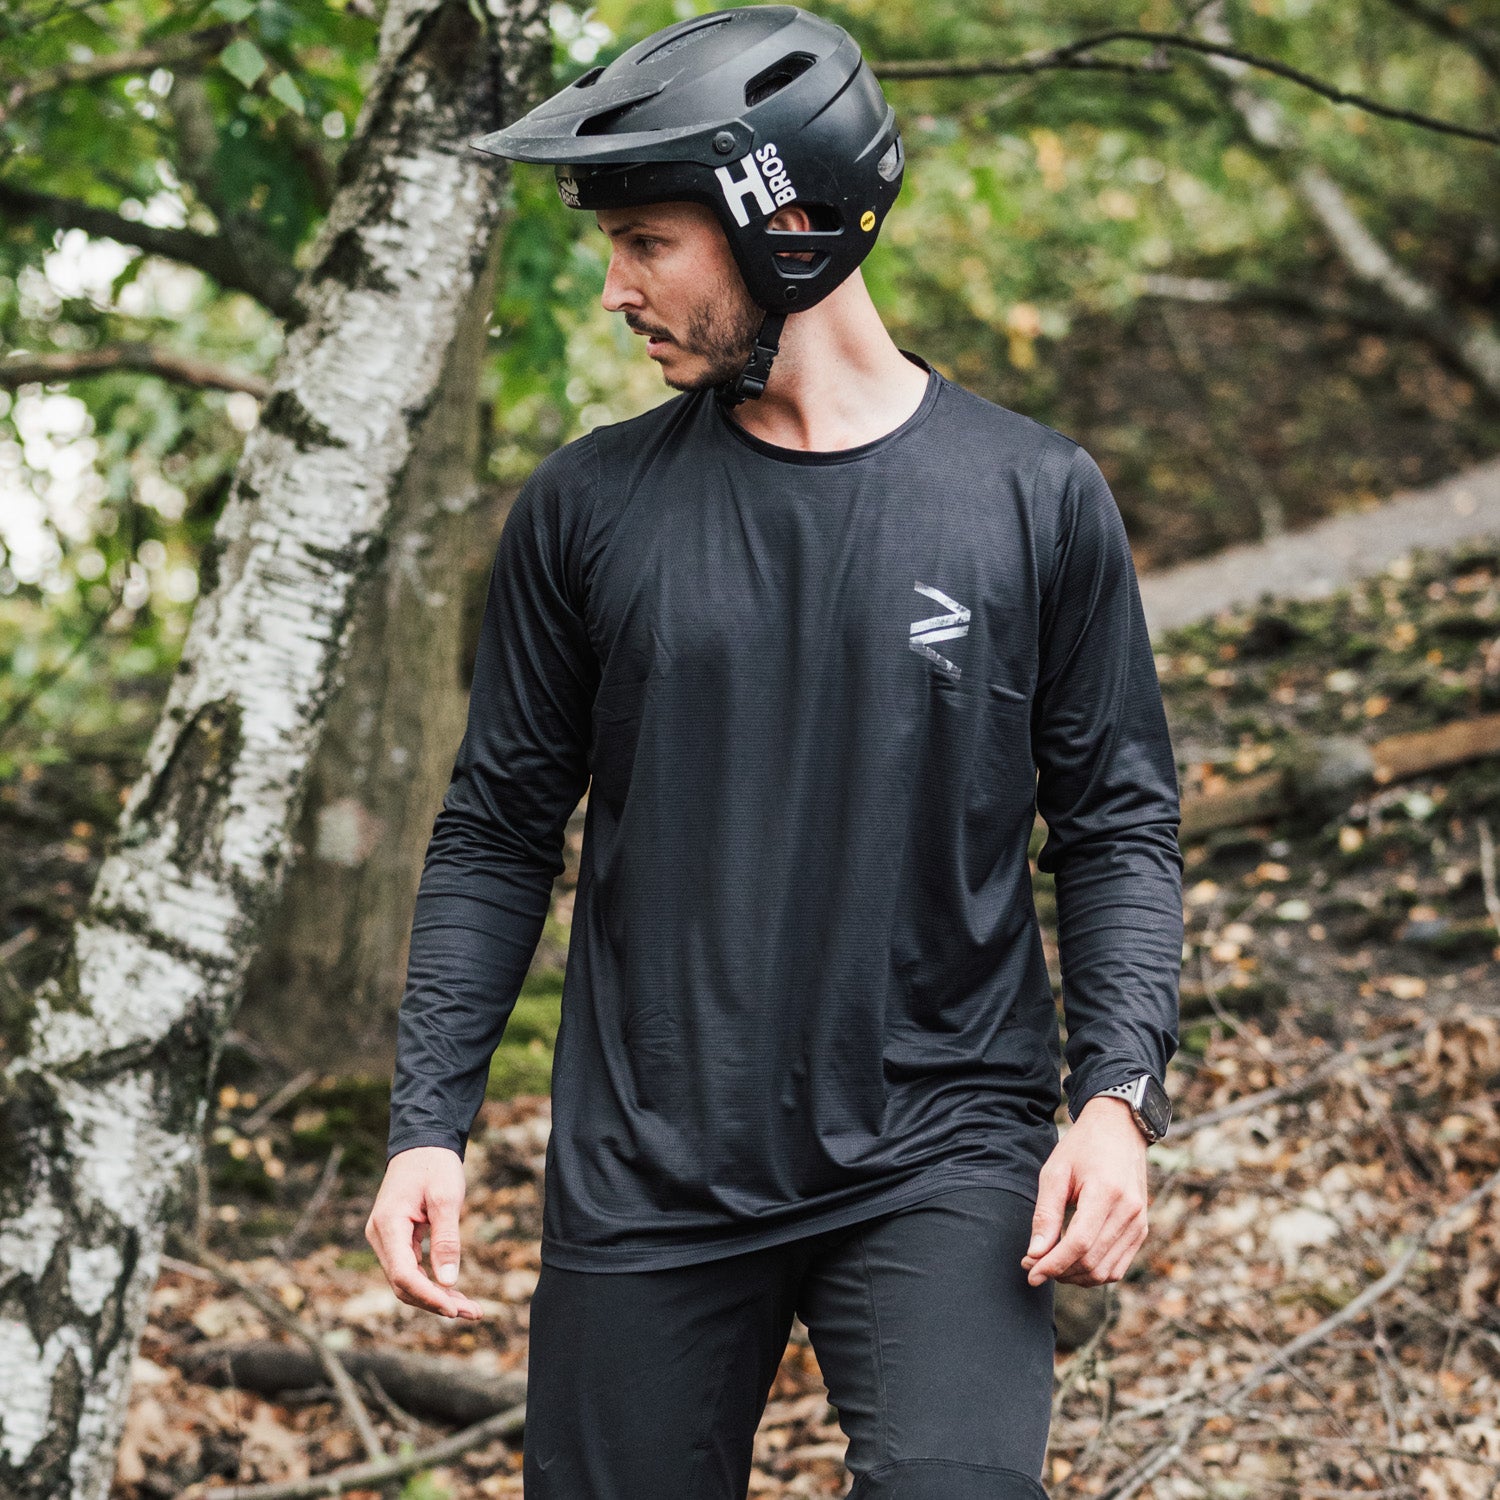 Endurance-ready black mountain biking jersey, long-sleeved and made with stretchy, sustainable fabric for downhill adventures.